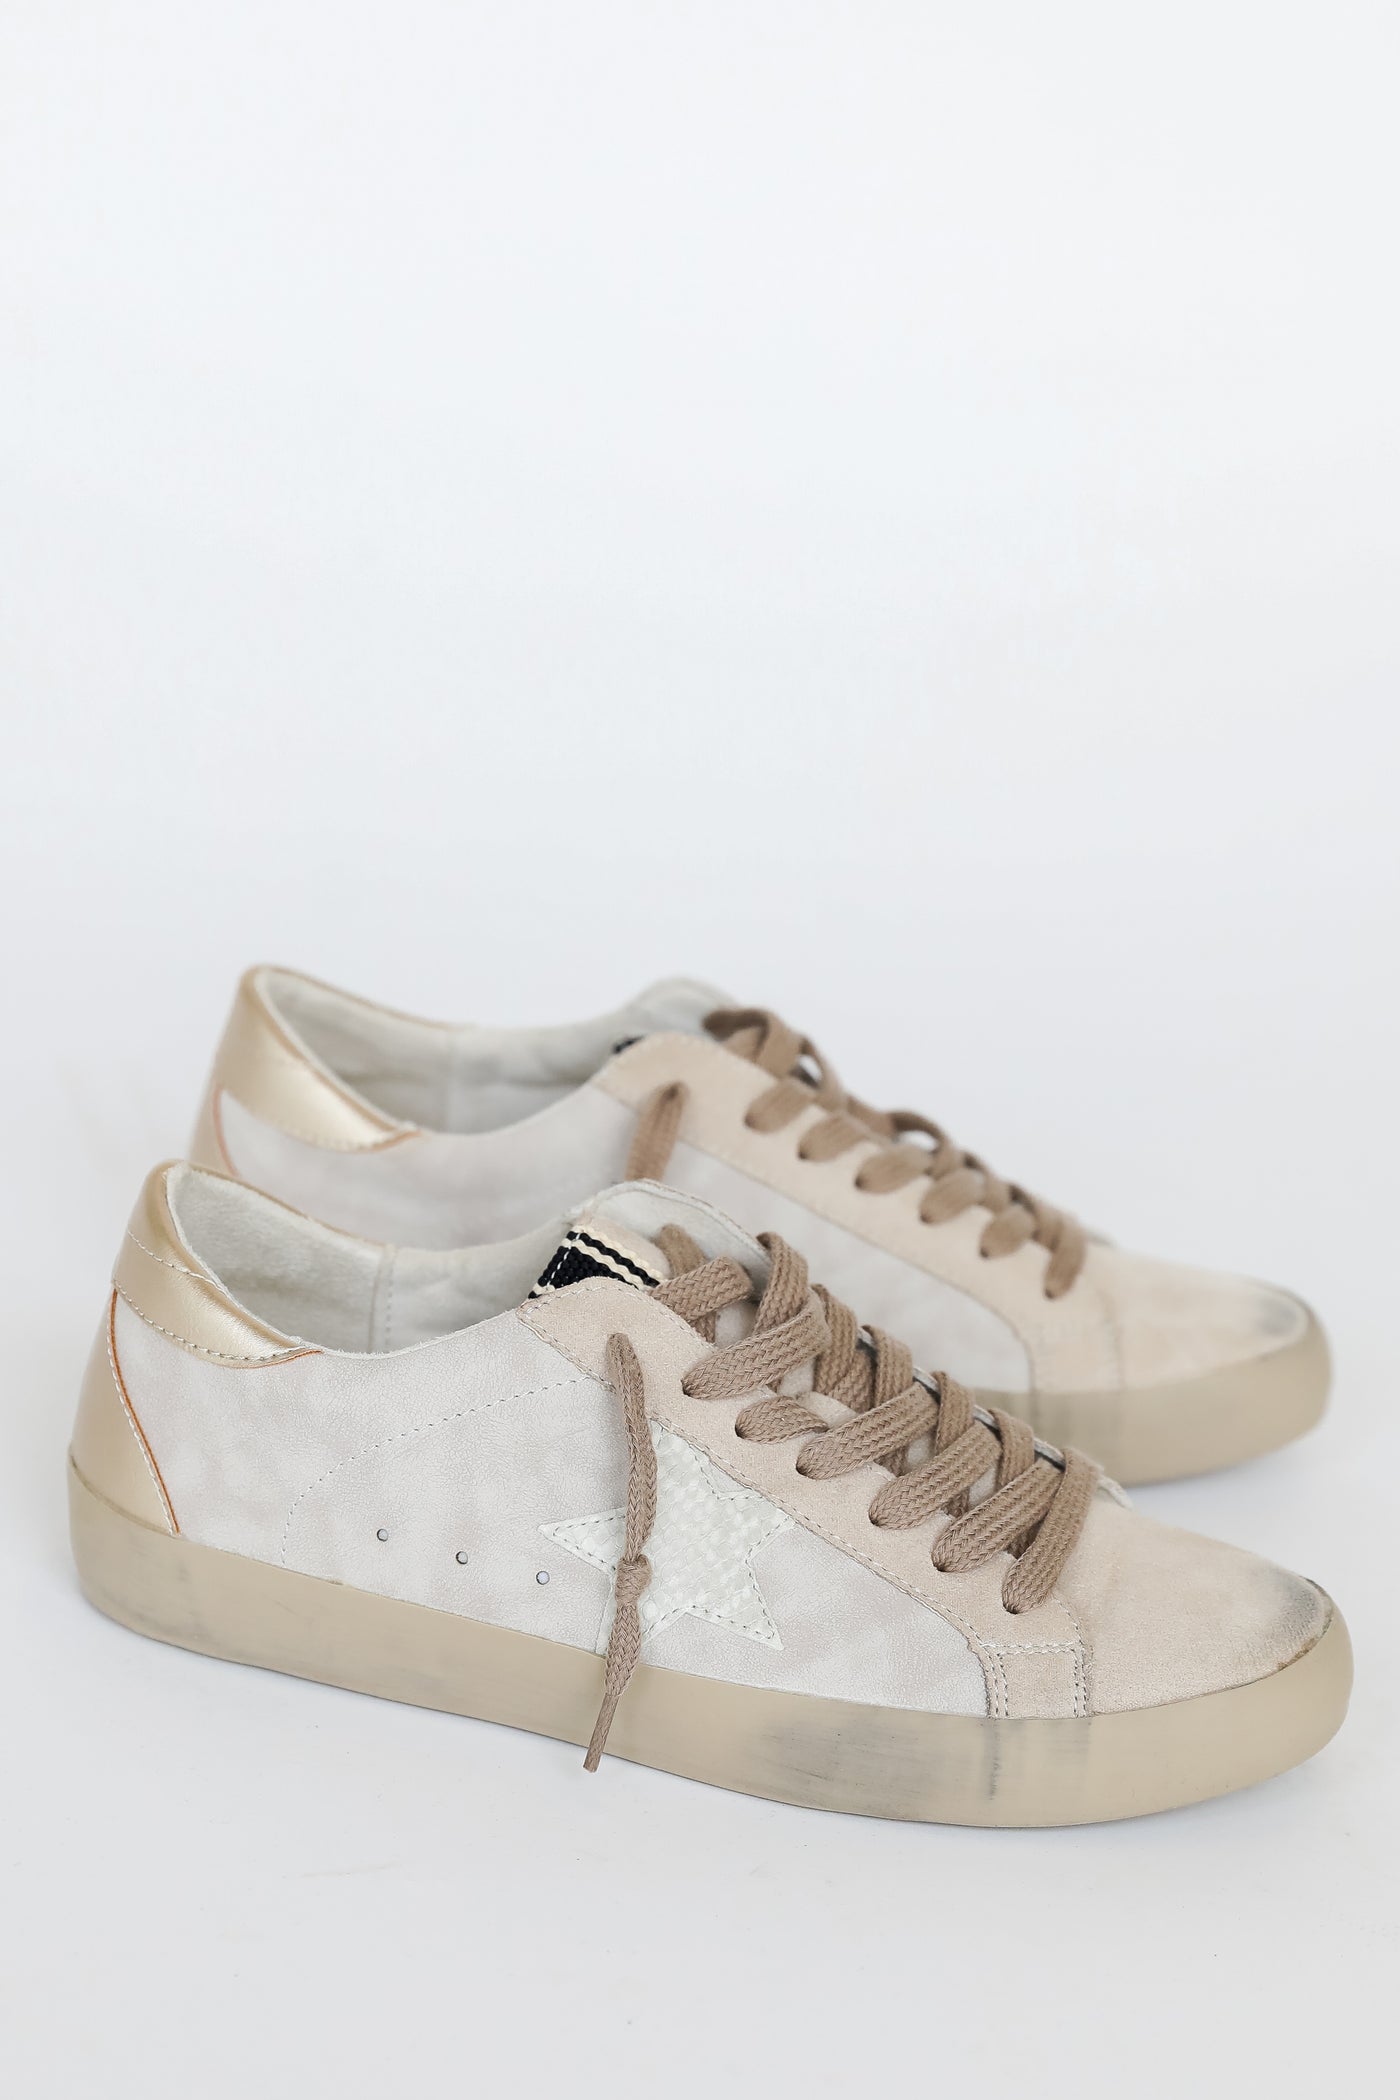 Star Sneakers side view flat lay